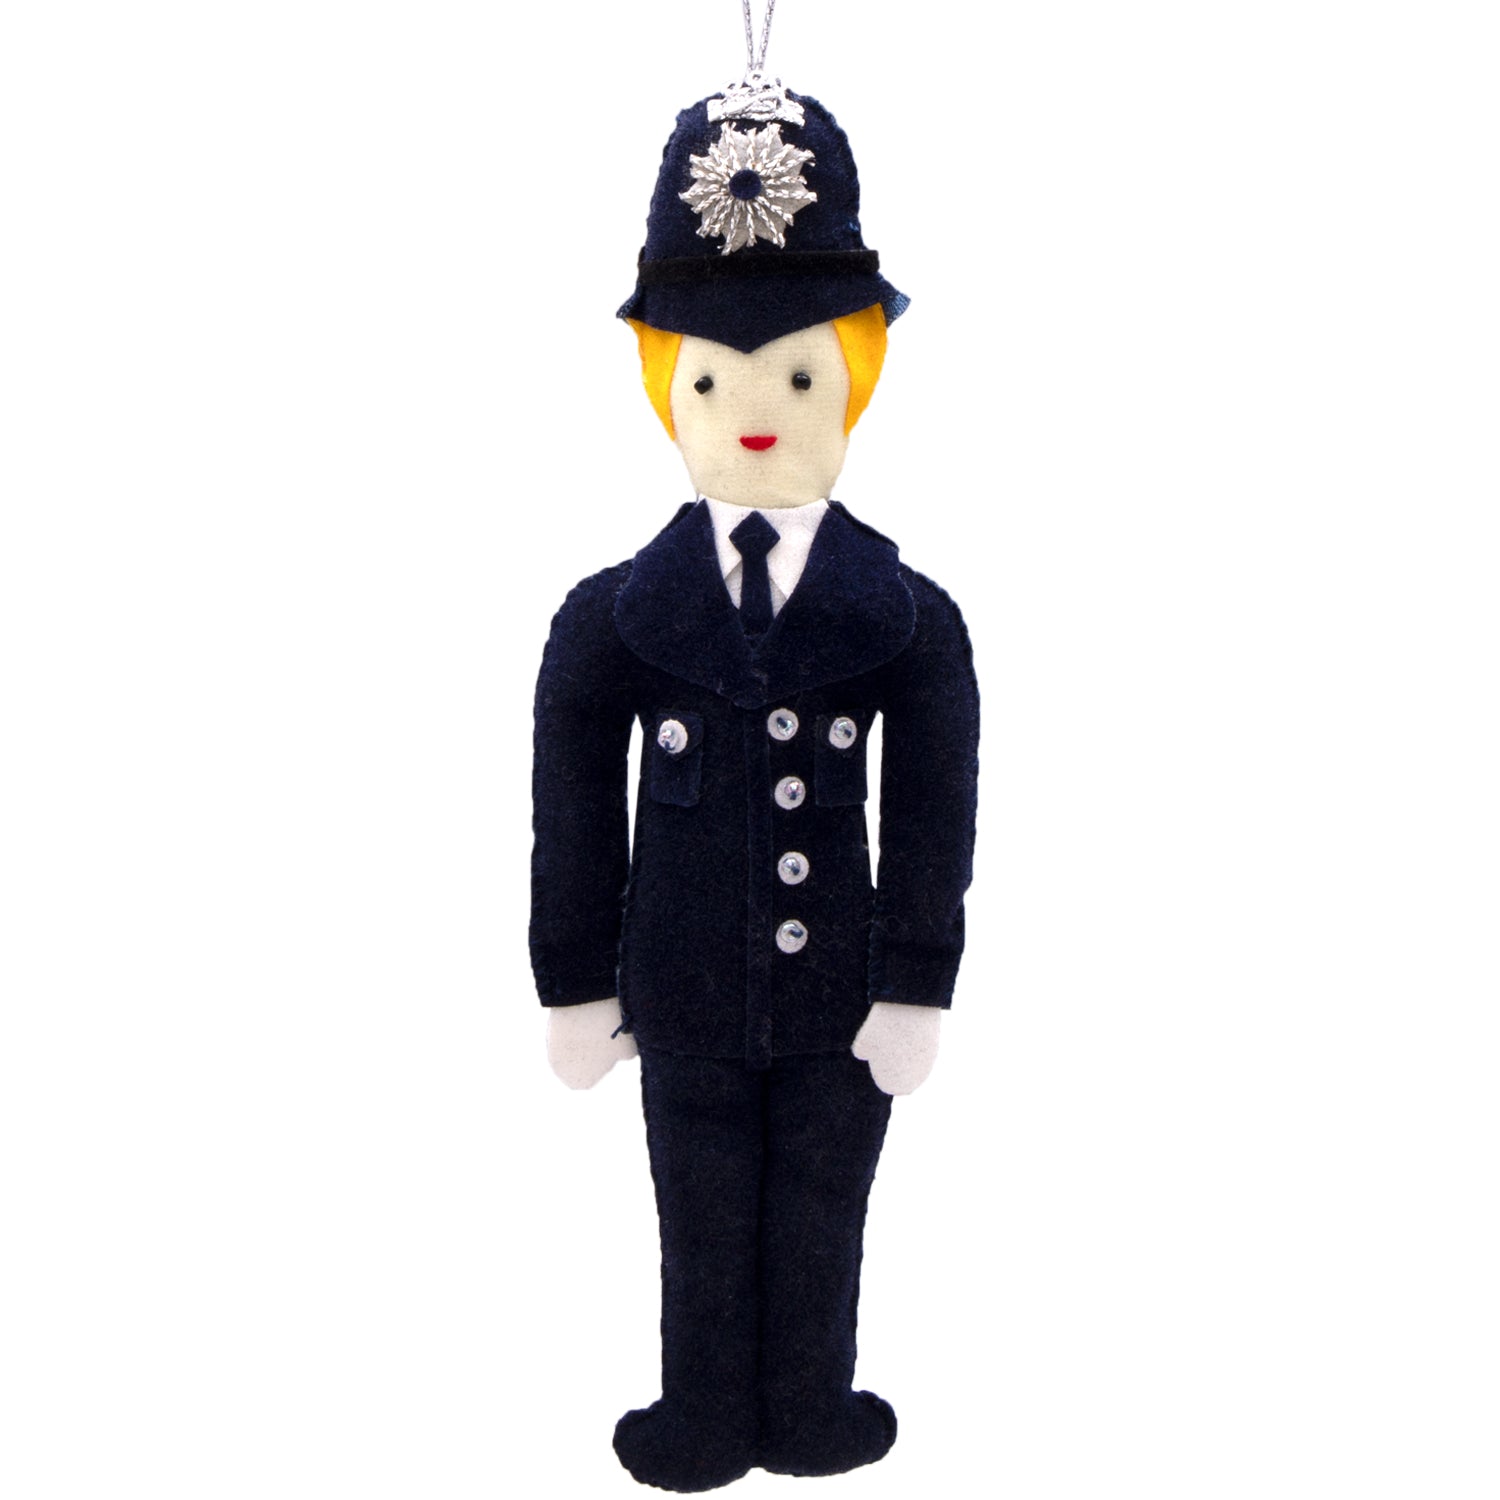 Policeman Stitched Christmas Decoration